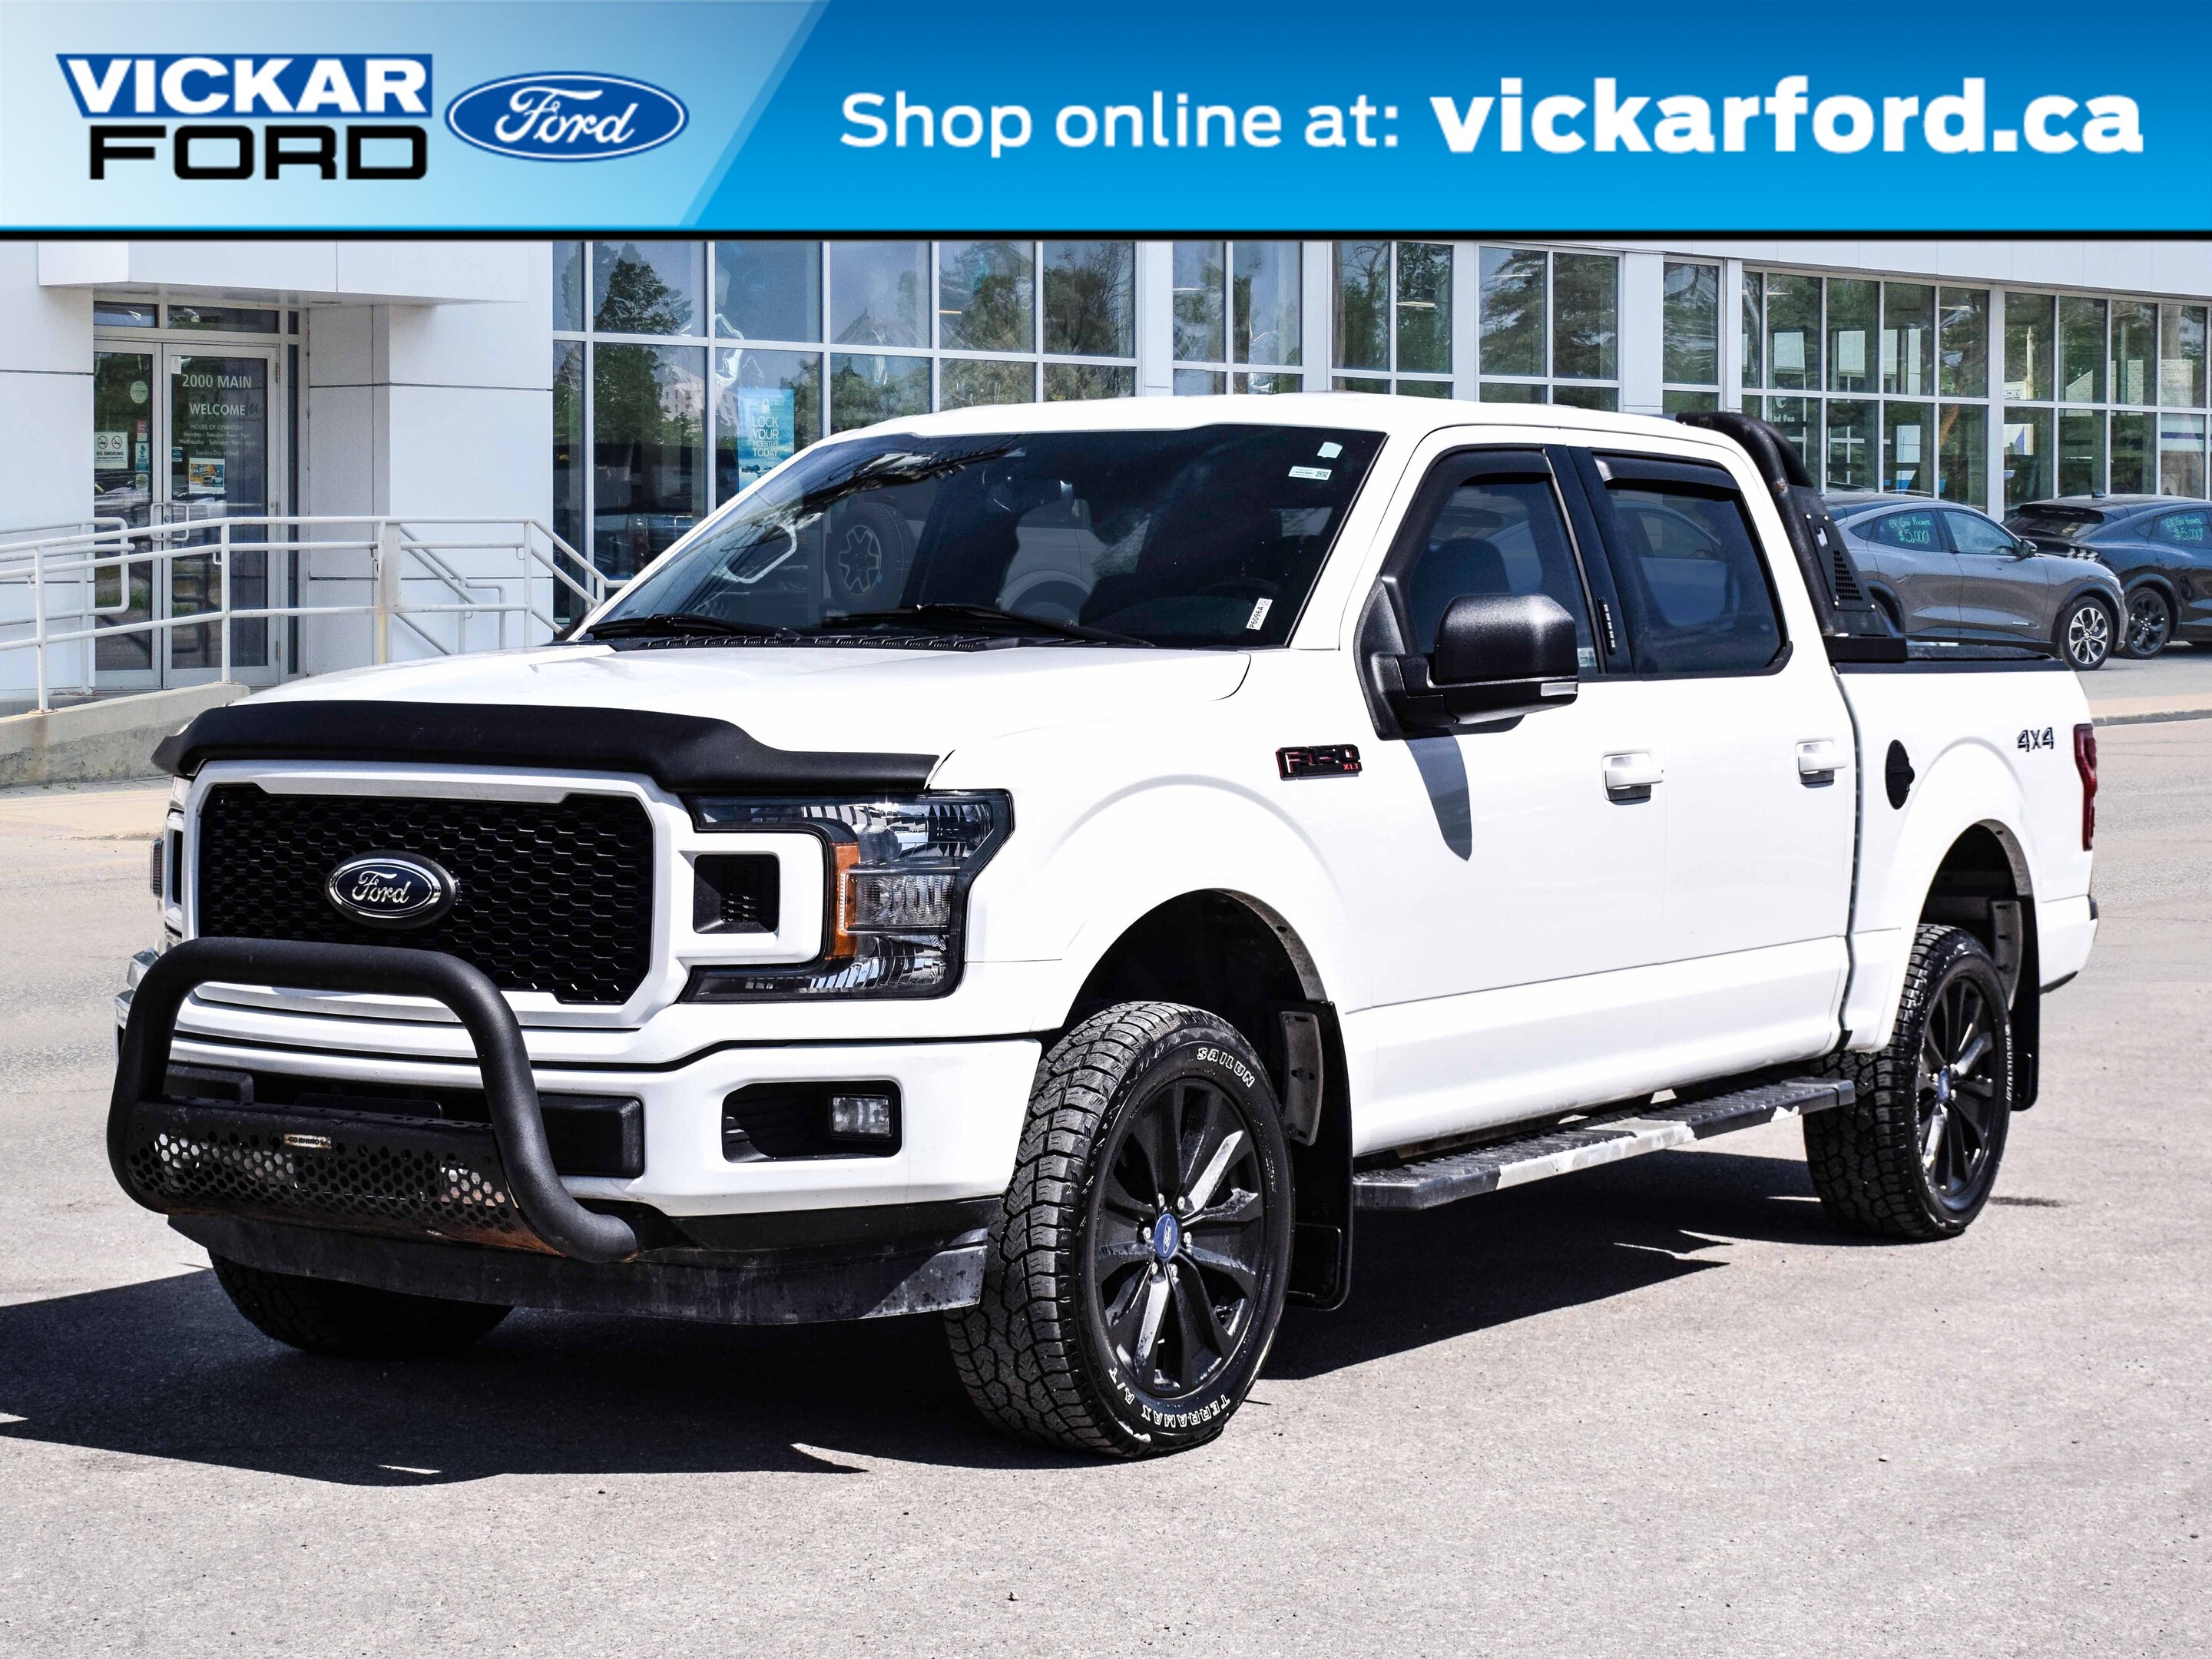 2019 Ford F-150 XLT 4WD Crew 5.0 V8 302A Special Edition w. Sport